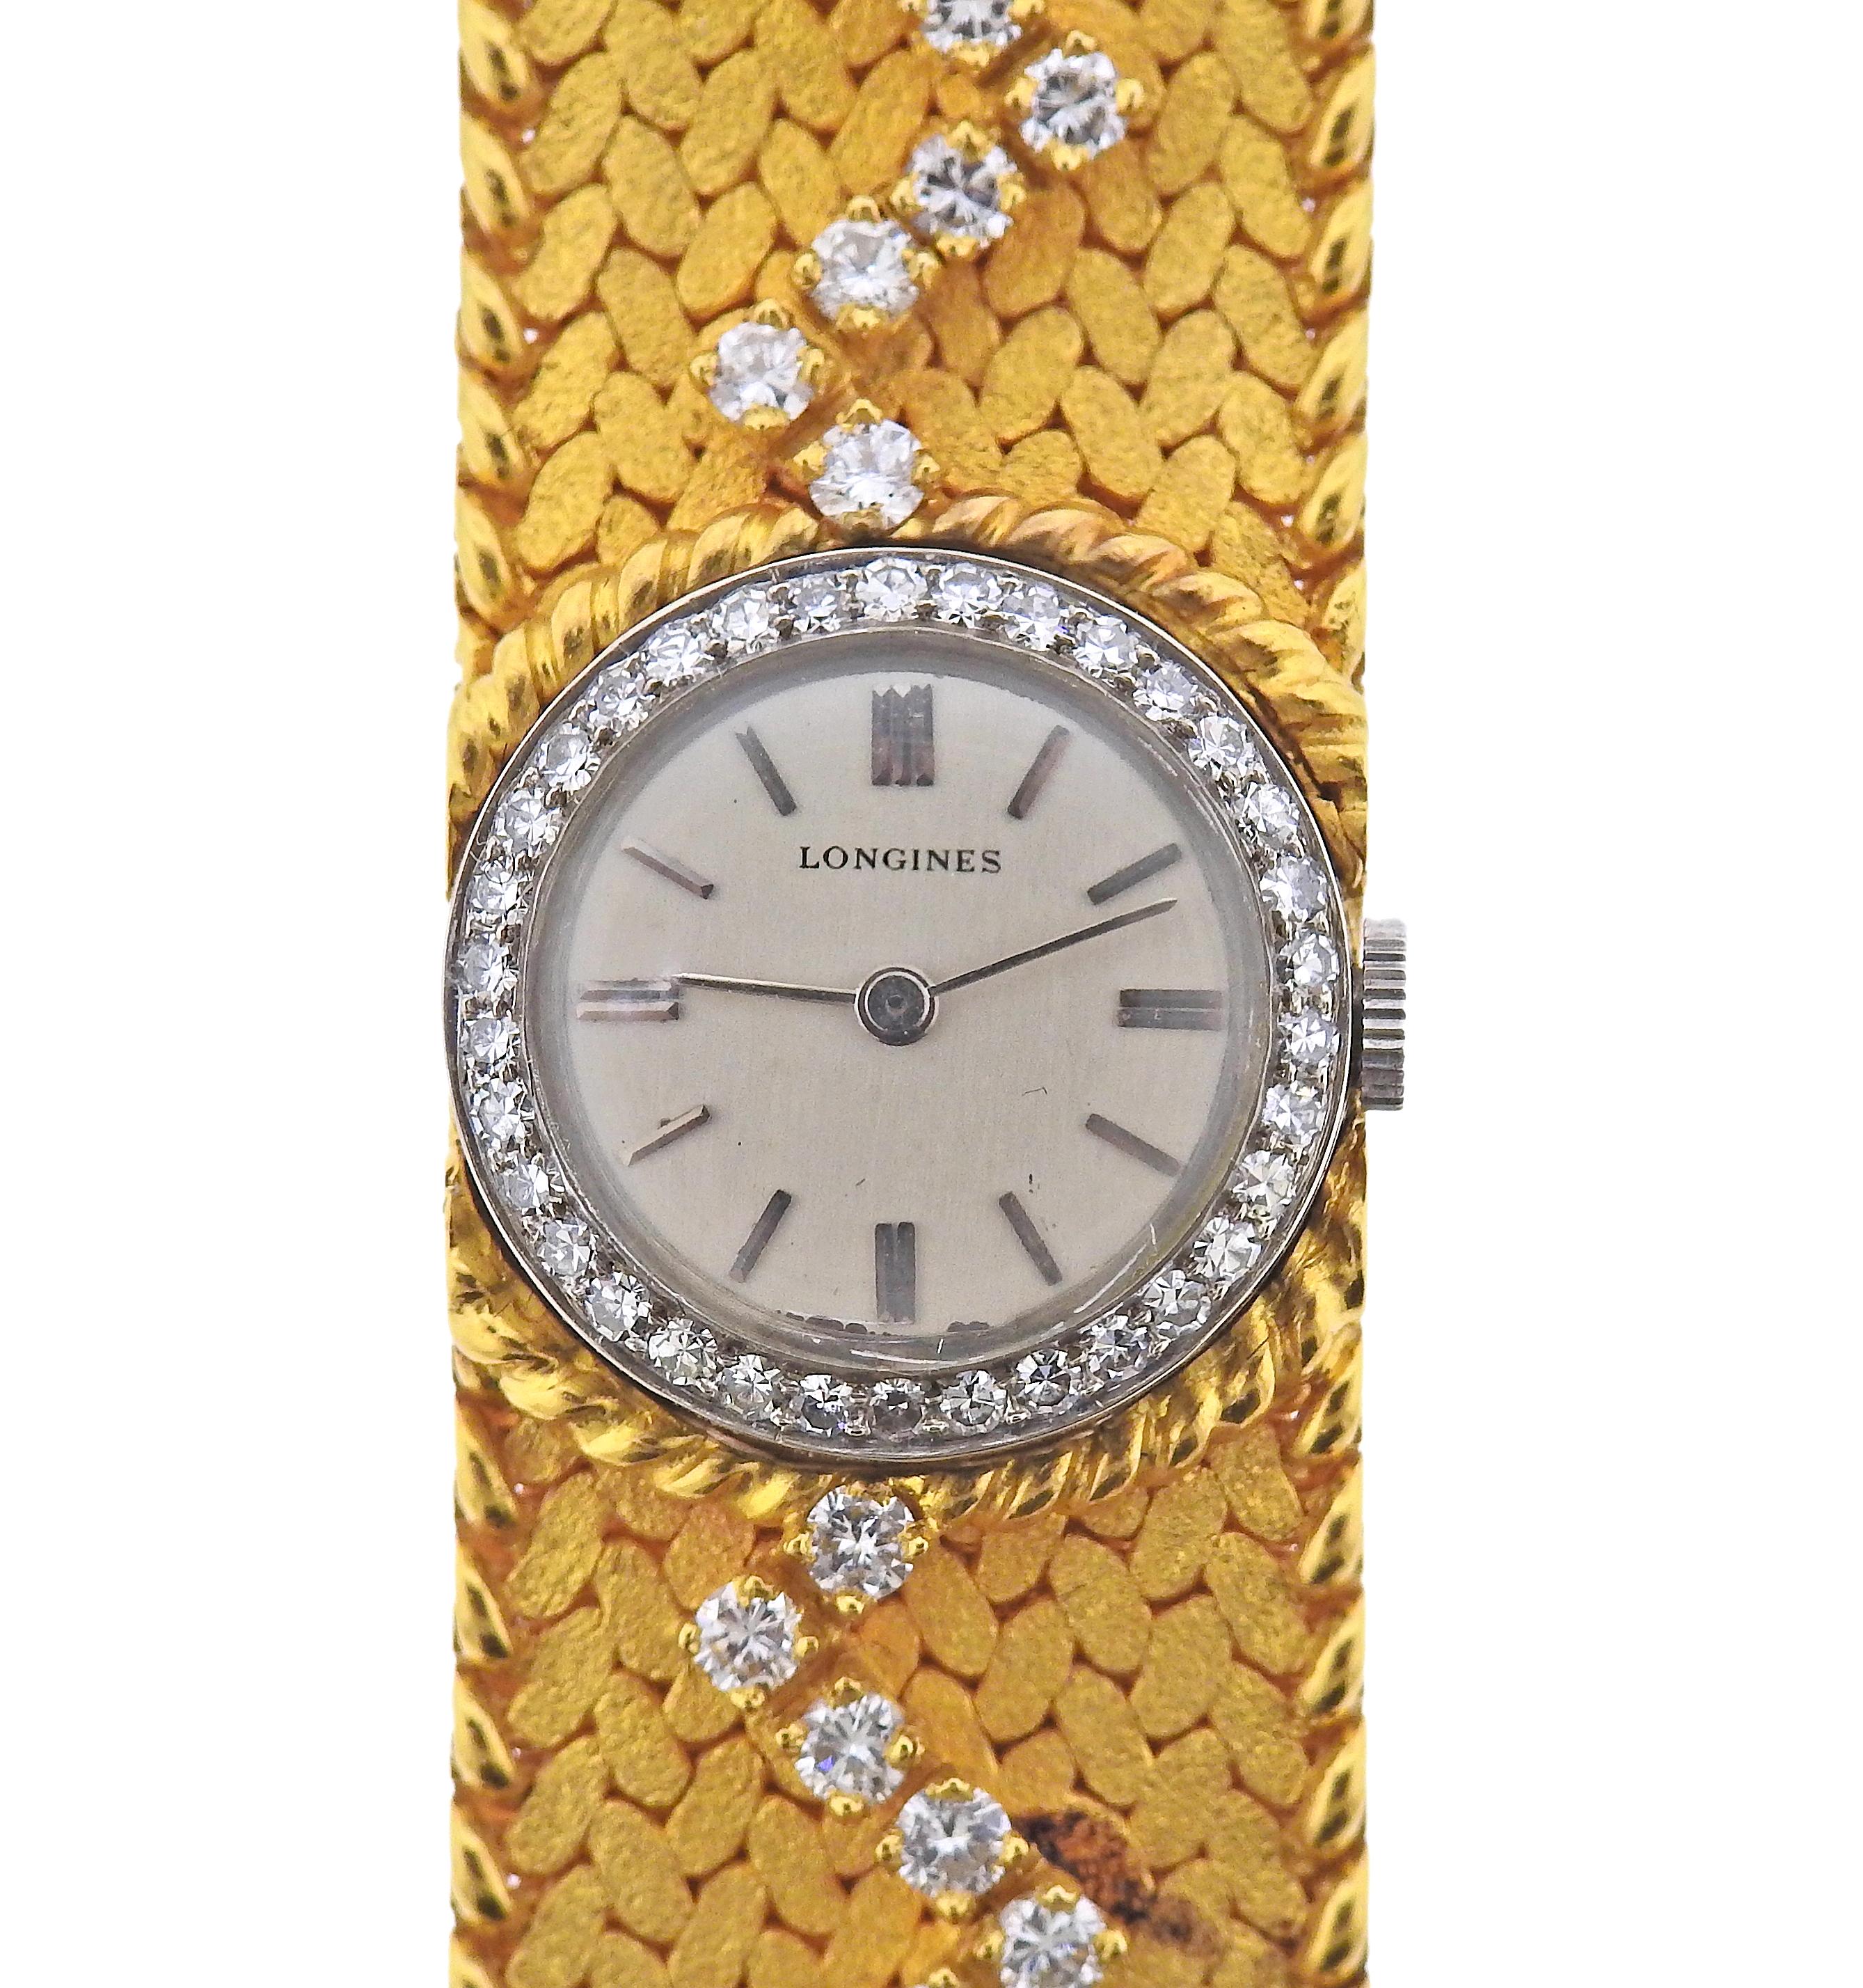 18k gold bracelet by Cartier, adorned with approx. 3.65ctw in diamonds, featuring Longines manual wind watch. Bracelet is 7 2/8